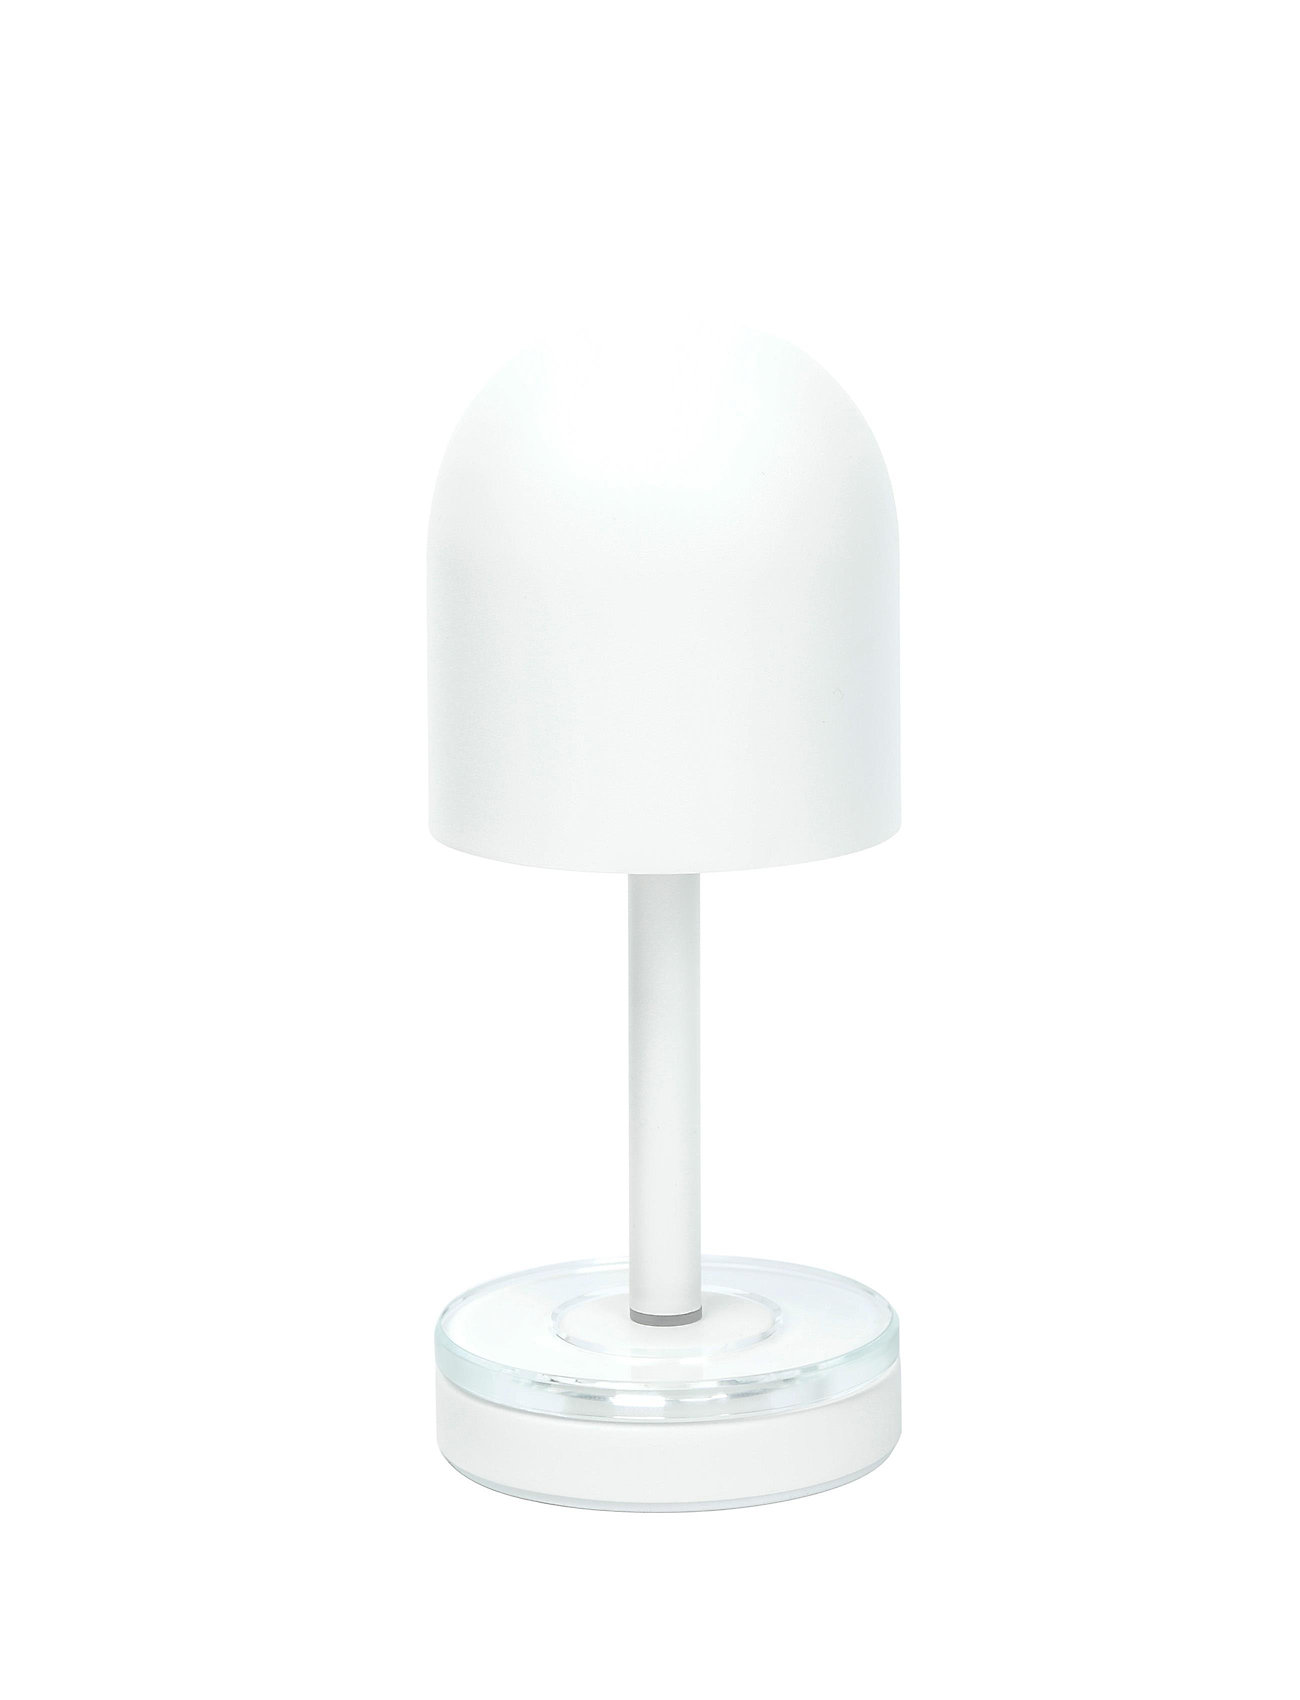 AYTM - LUCEO portable lamp - desk & table lamps - white/clear - 1